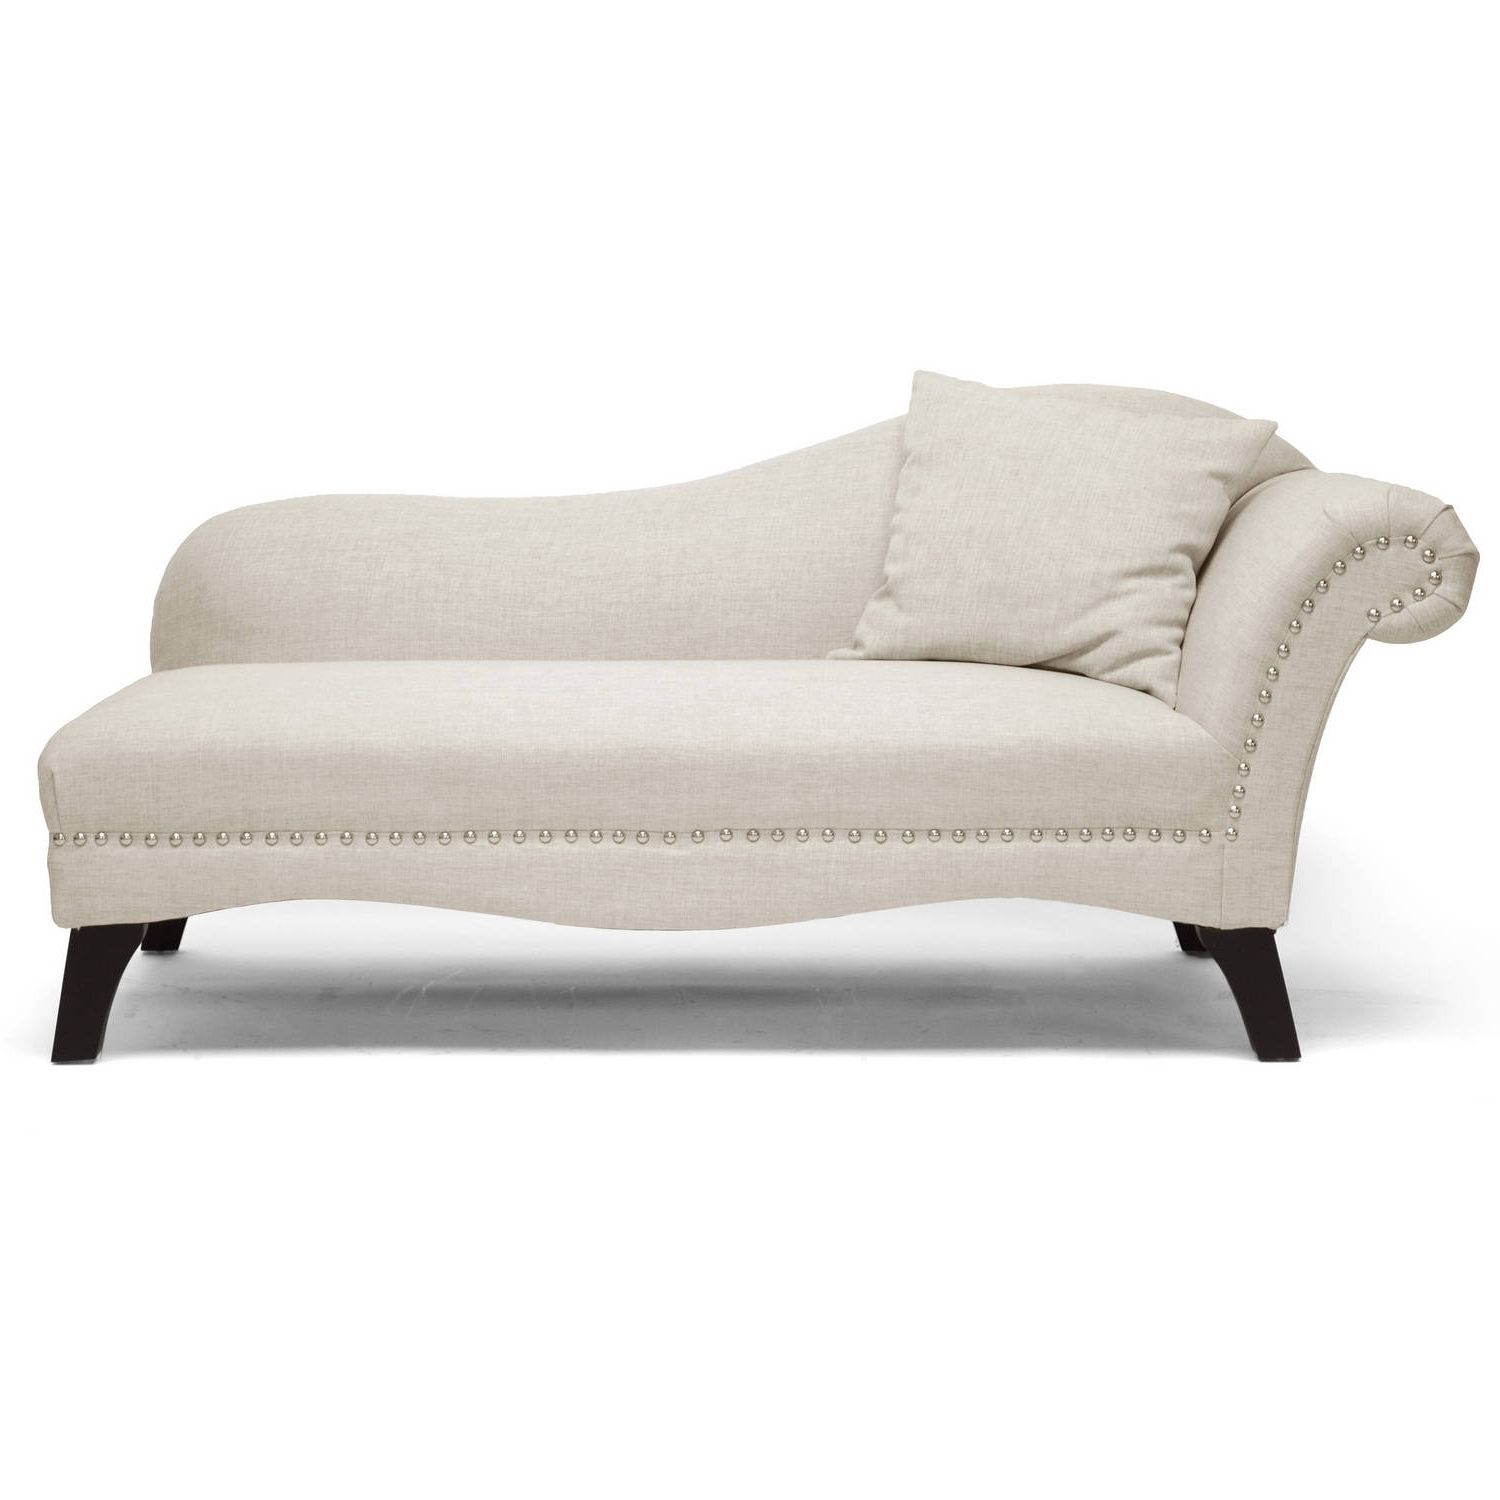 Most Up To Date White Leather Chaise Lounges Pertaining To Chaise Lounges – Walmart (View 12 of 15)